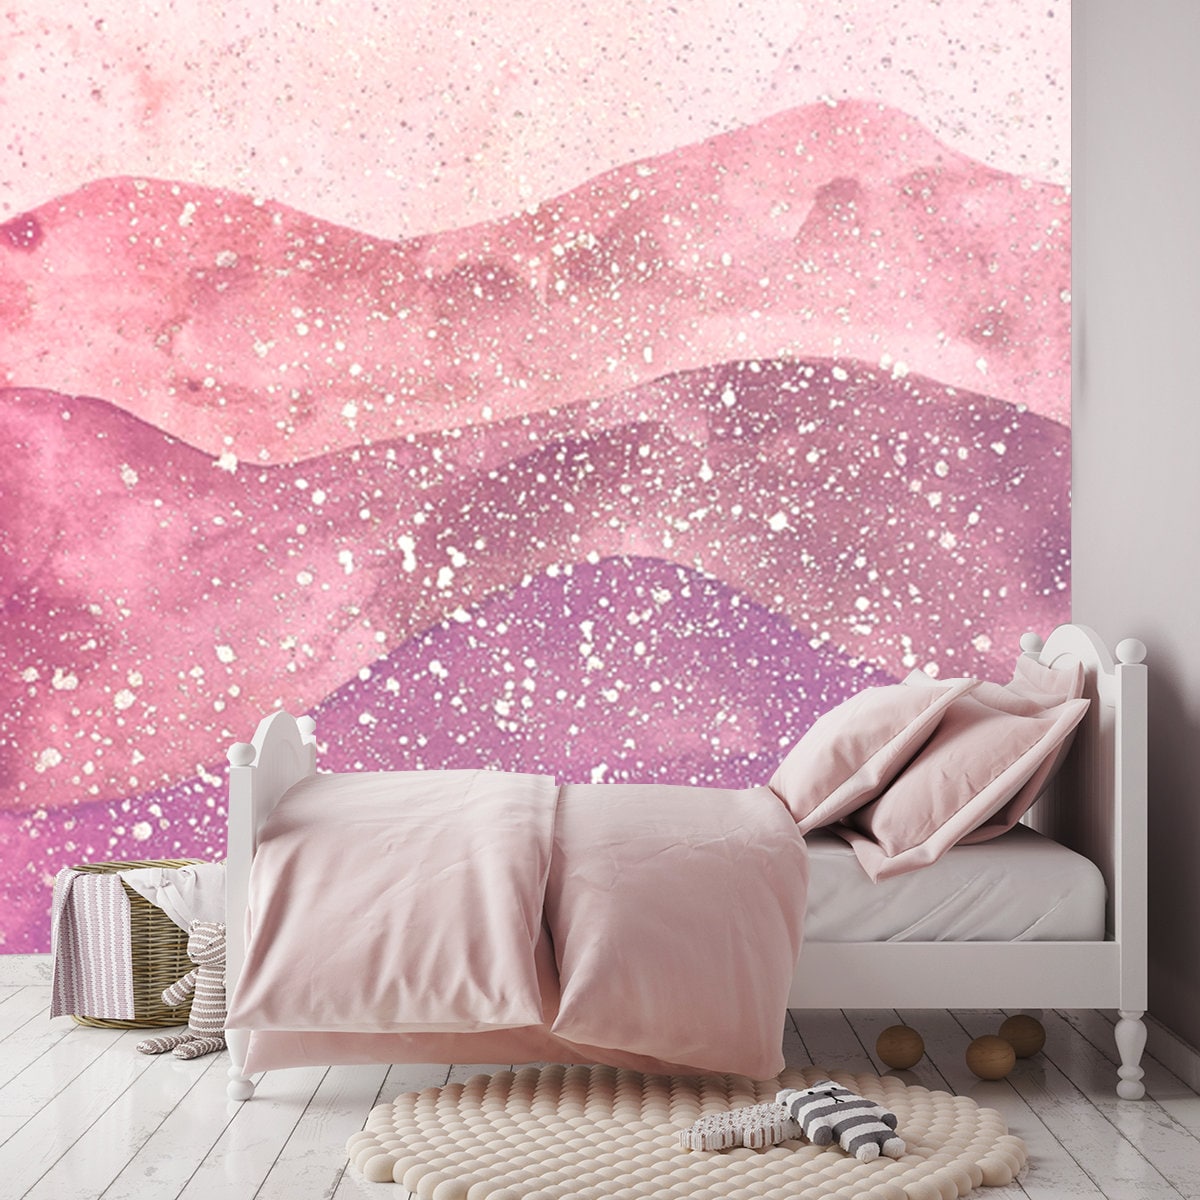 Mountain Print. Painted in Watercolors in Dusty Pink with Gold Sparkles Wallpaper Girls Bedroom Mural